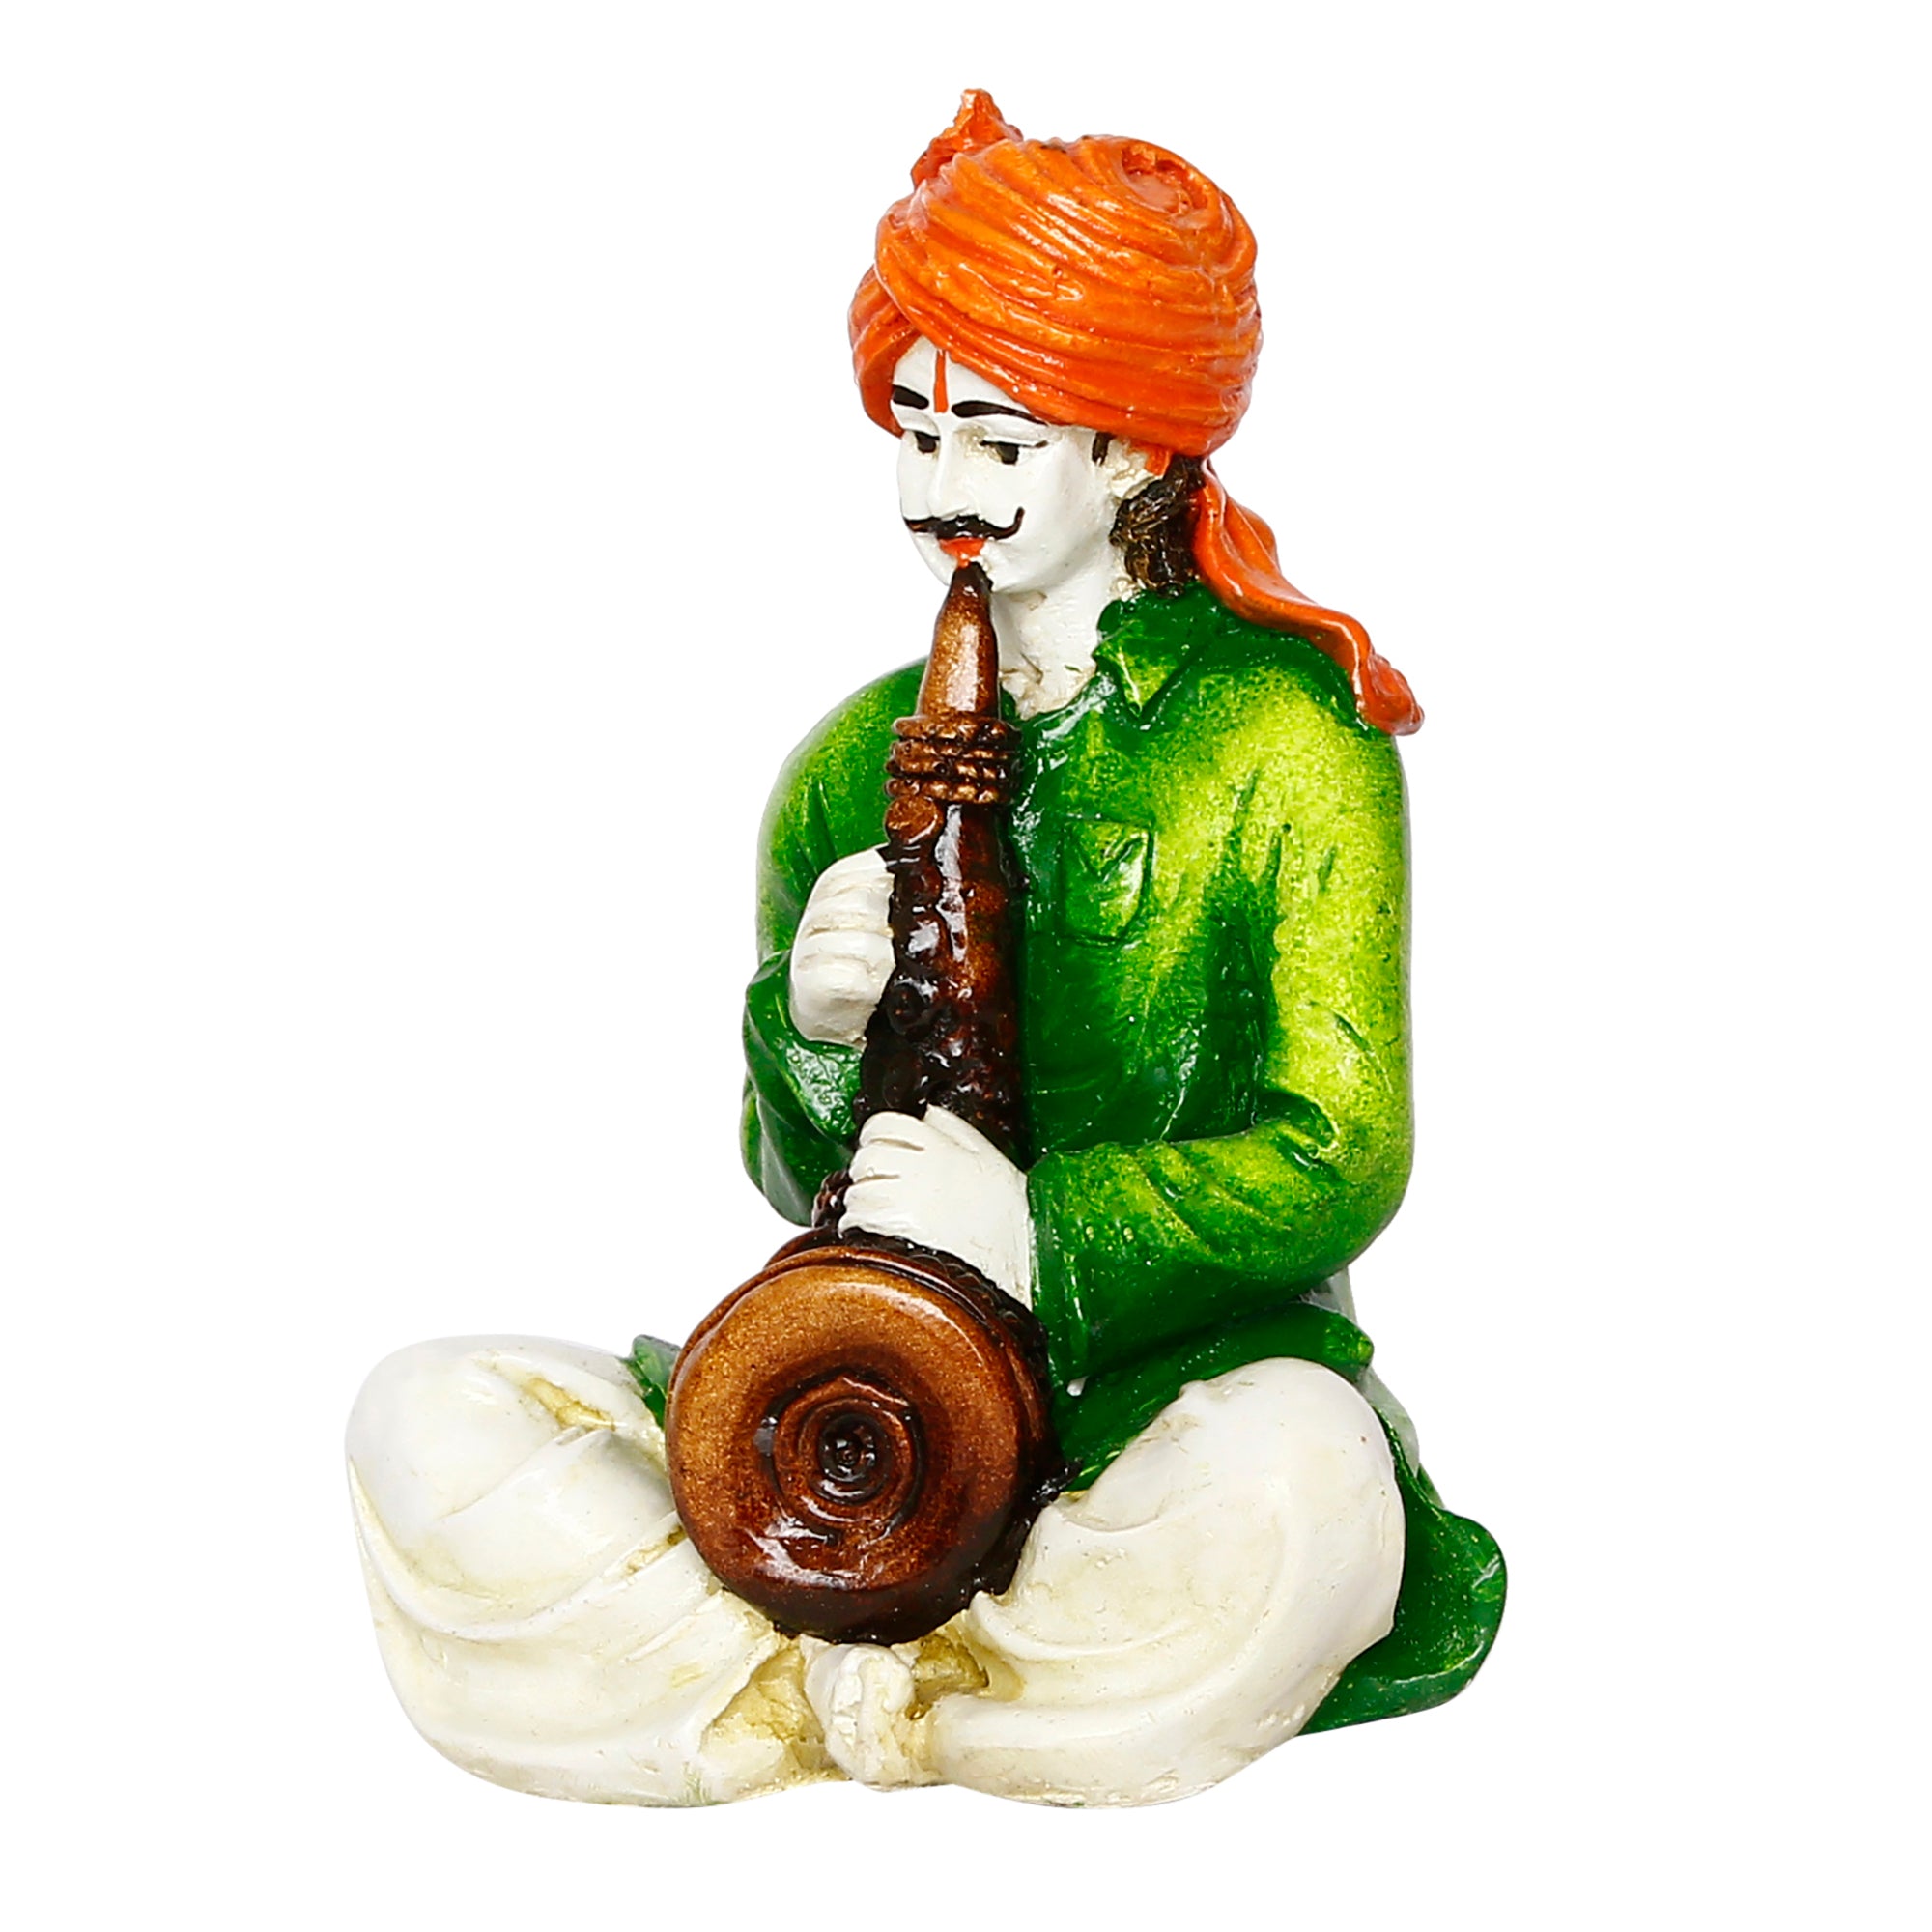 Polyresin Rajasthani Musician Men Statue Playing Musical Instrument Human Figurines Home Decor Showpiece 5